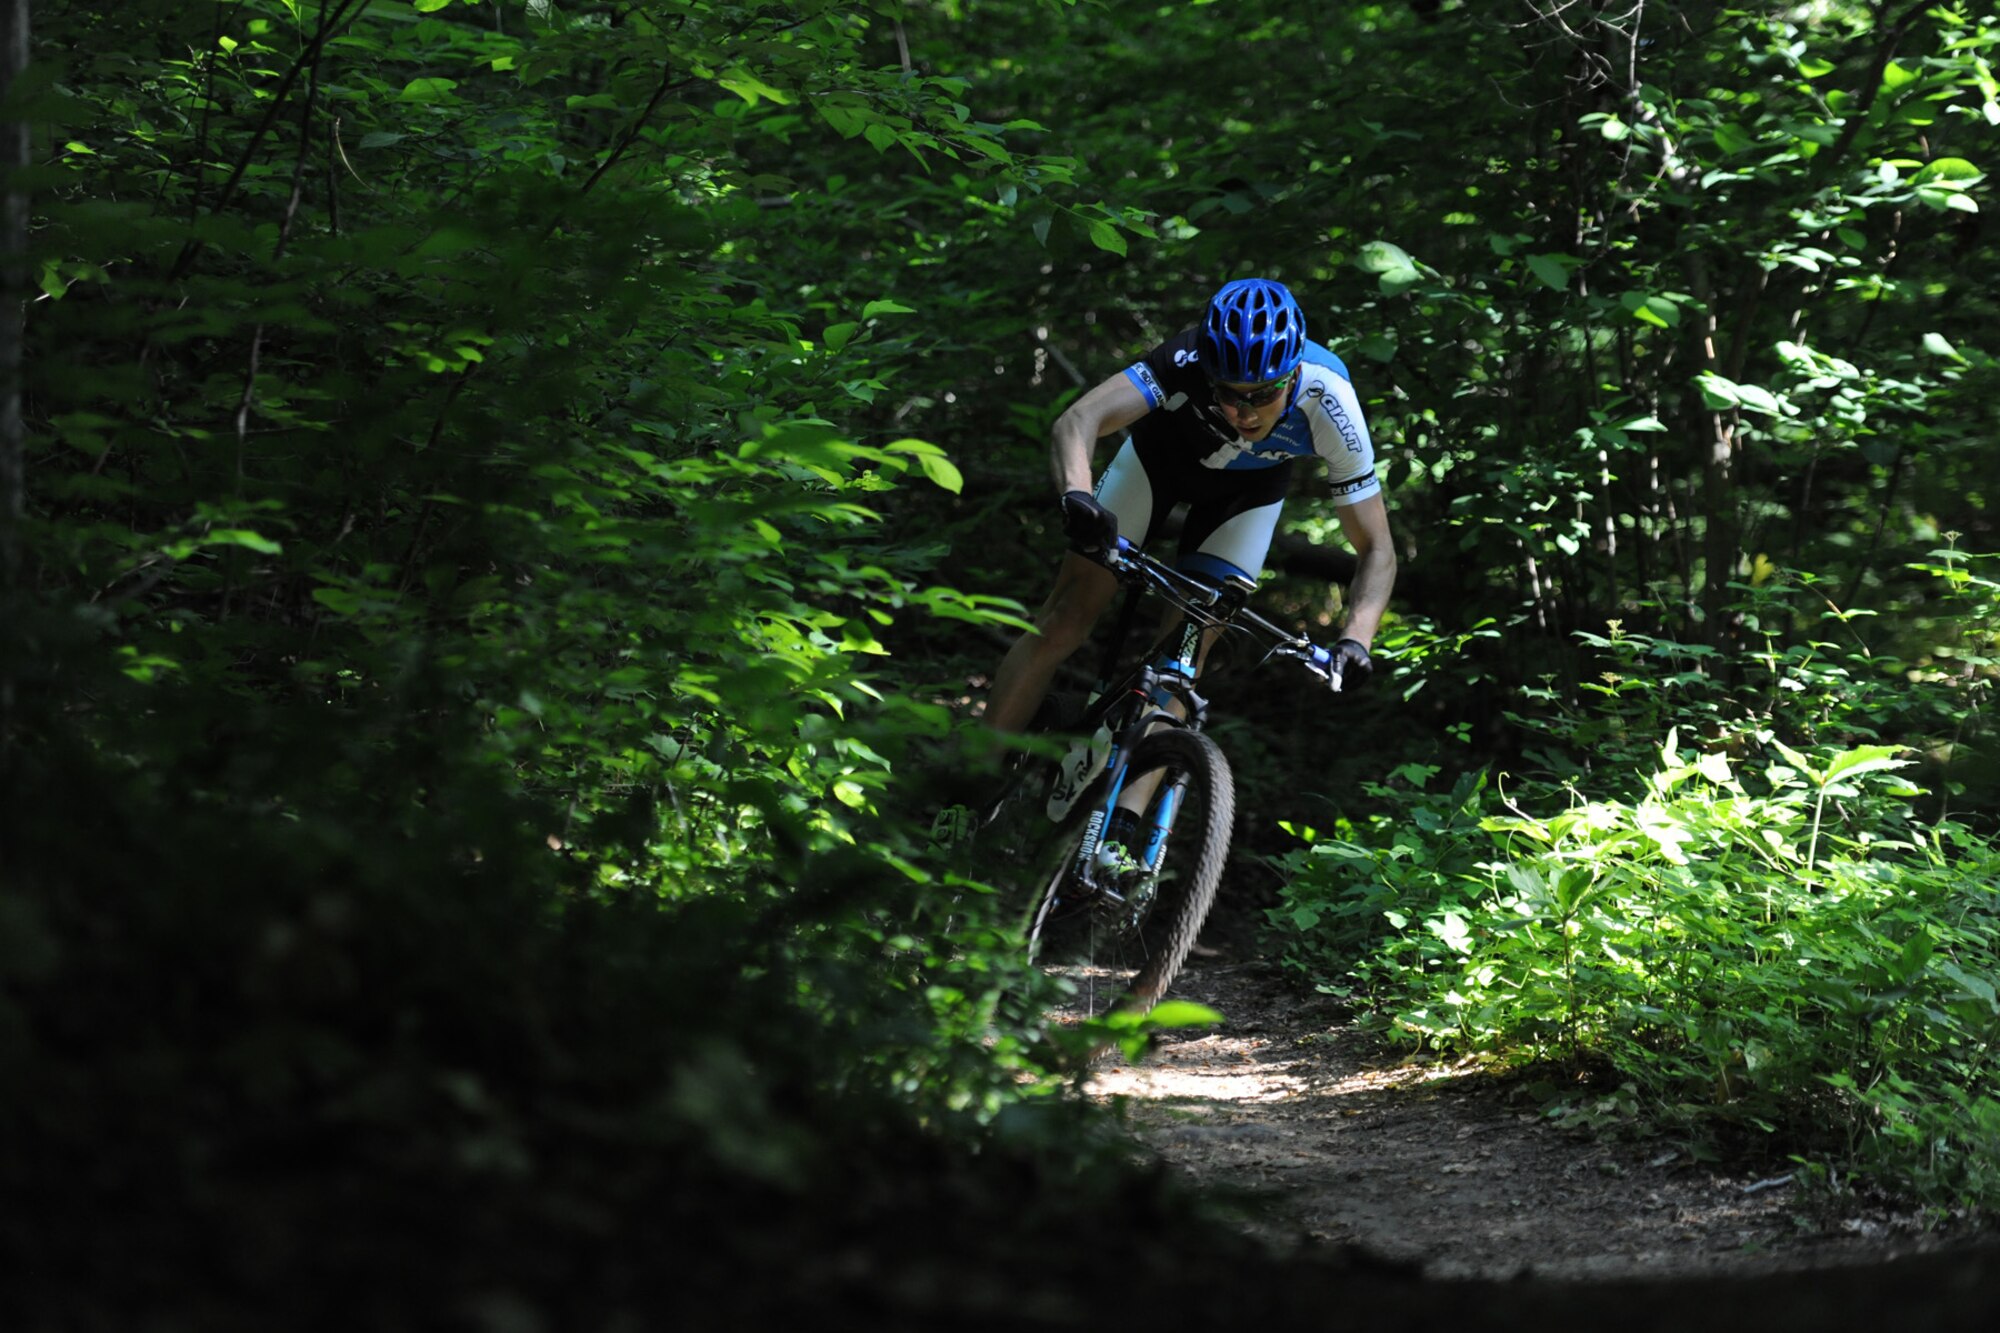 Senior Airman David Flaten, a 811th Security Forces Squadron protective services member and professional cross-country mountain biker, trains June 3, 2014, at Rosaryville State Park, Md. Flaten is ranked 43rd of 250 according to USA Cycling, the official cycling organization responsible for identifying, training and selecting cyclists to represent the United States in international competition. (U.S. Air Force photo/Senior Airman Nesha Humes)